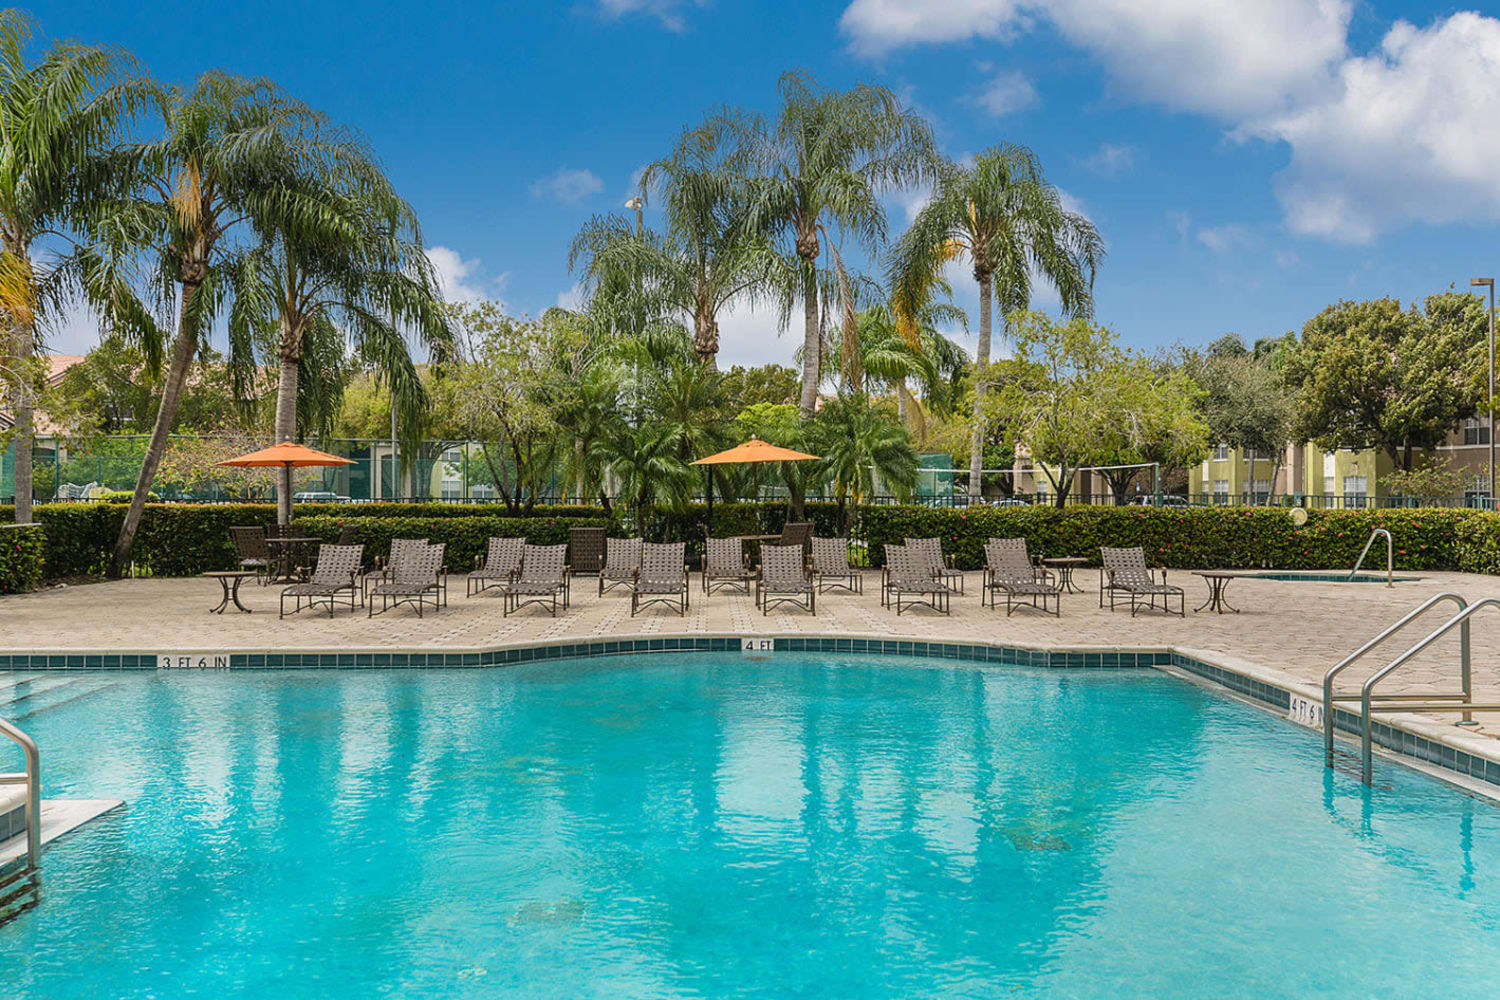 Pool with lounge chairs at Royal St. George at the Villages Apartment Homes in West Palm Beach, Florida